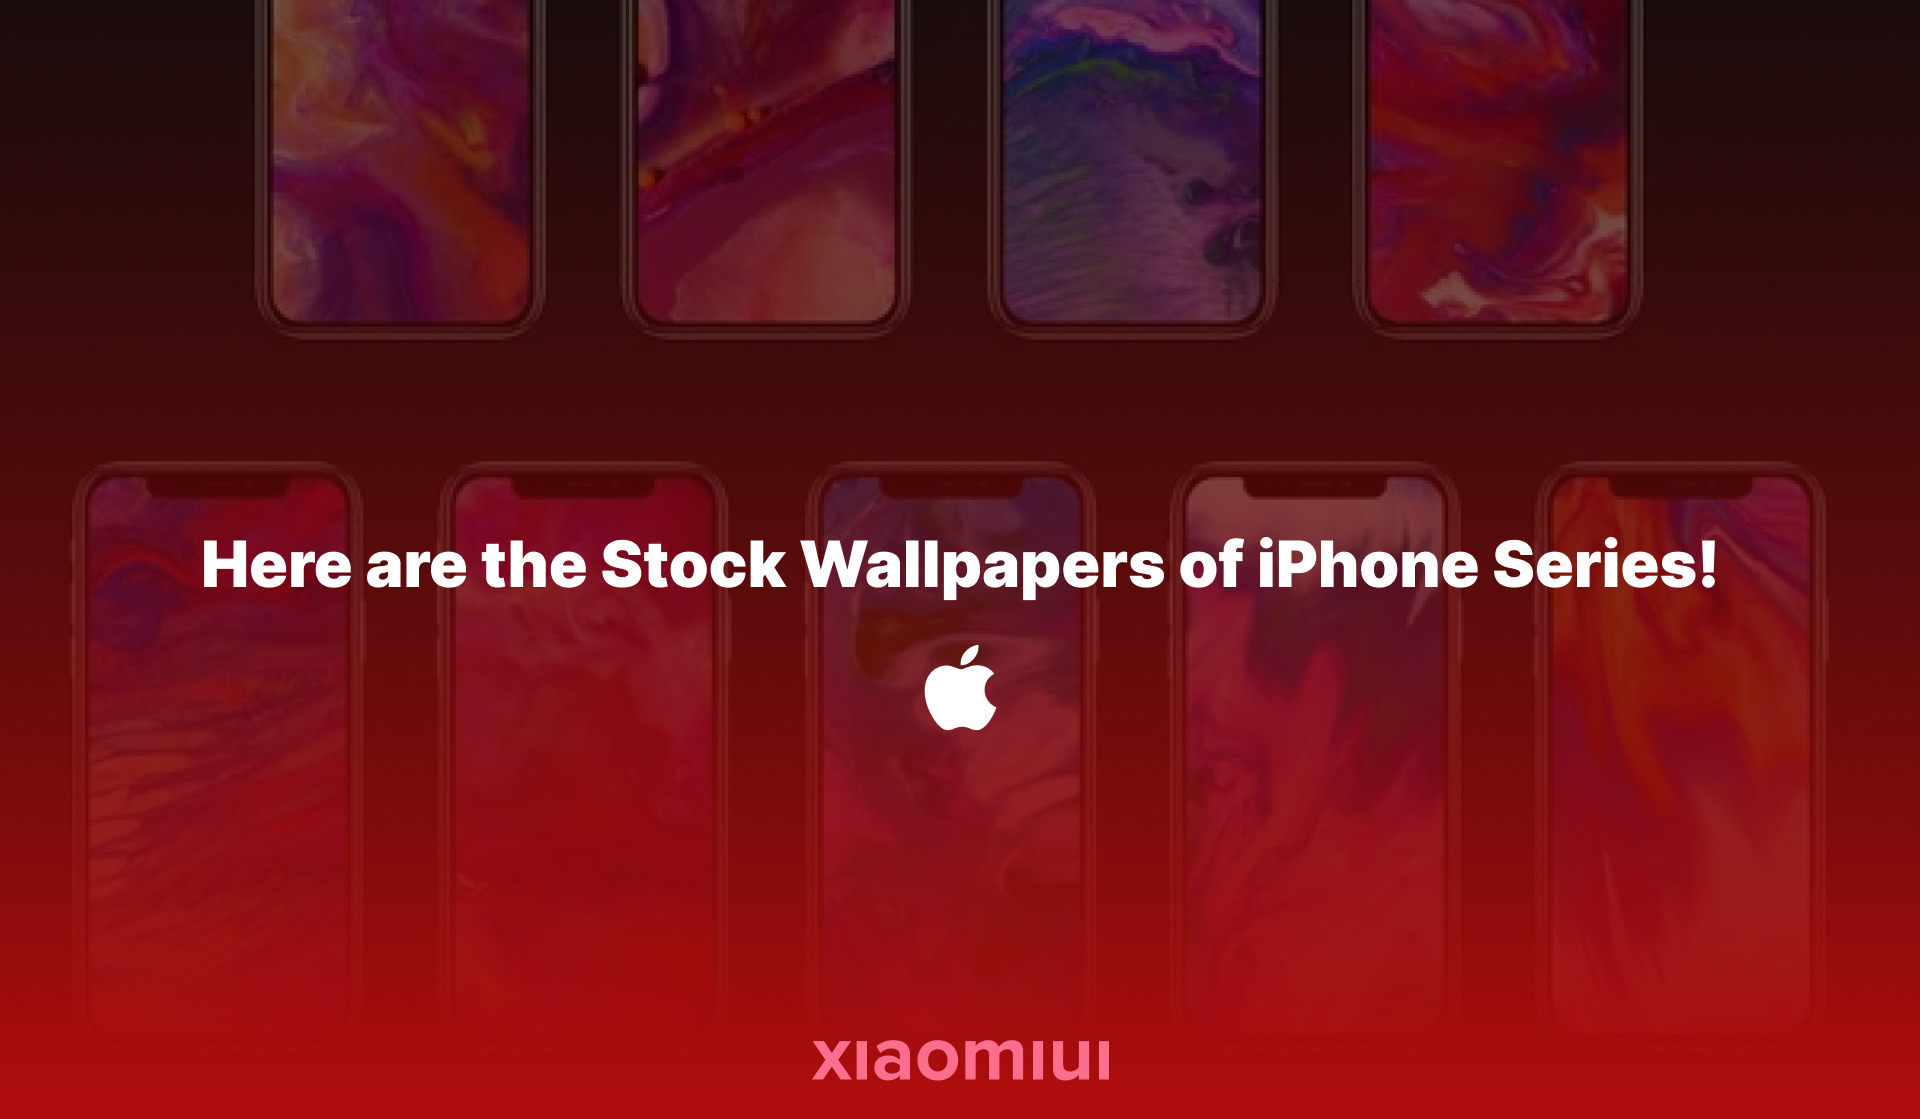 Here are the Stock Wallpapers of iPhone Series! - xiaomiui